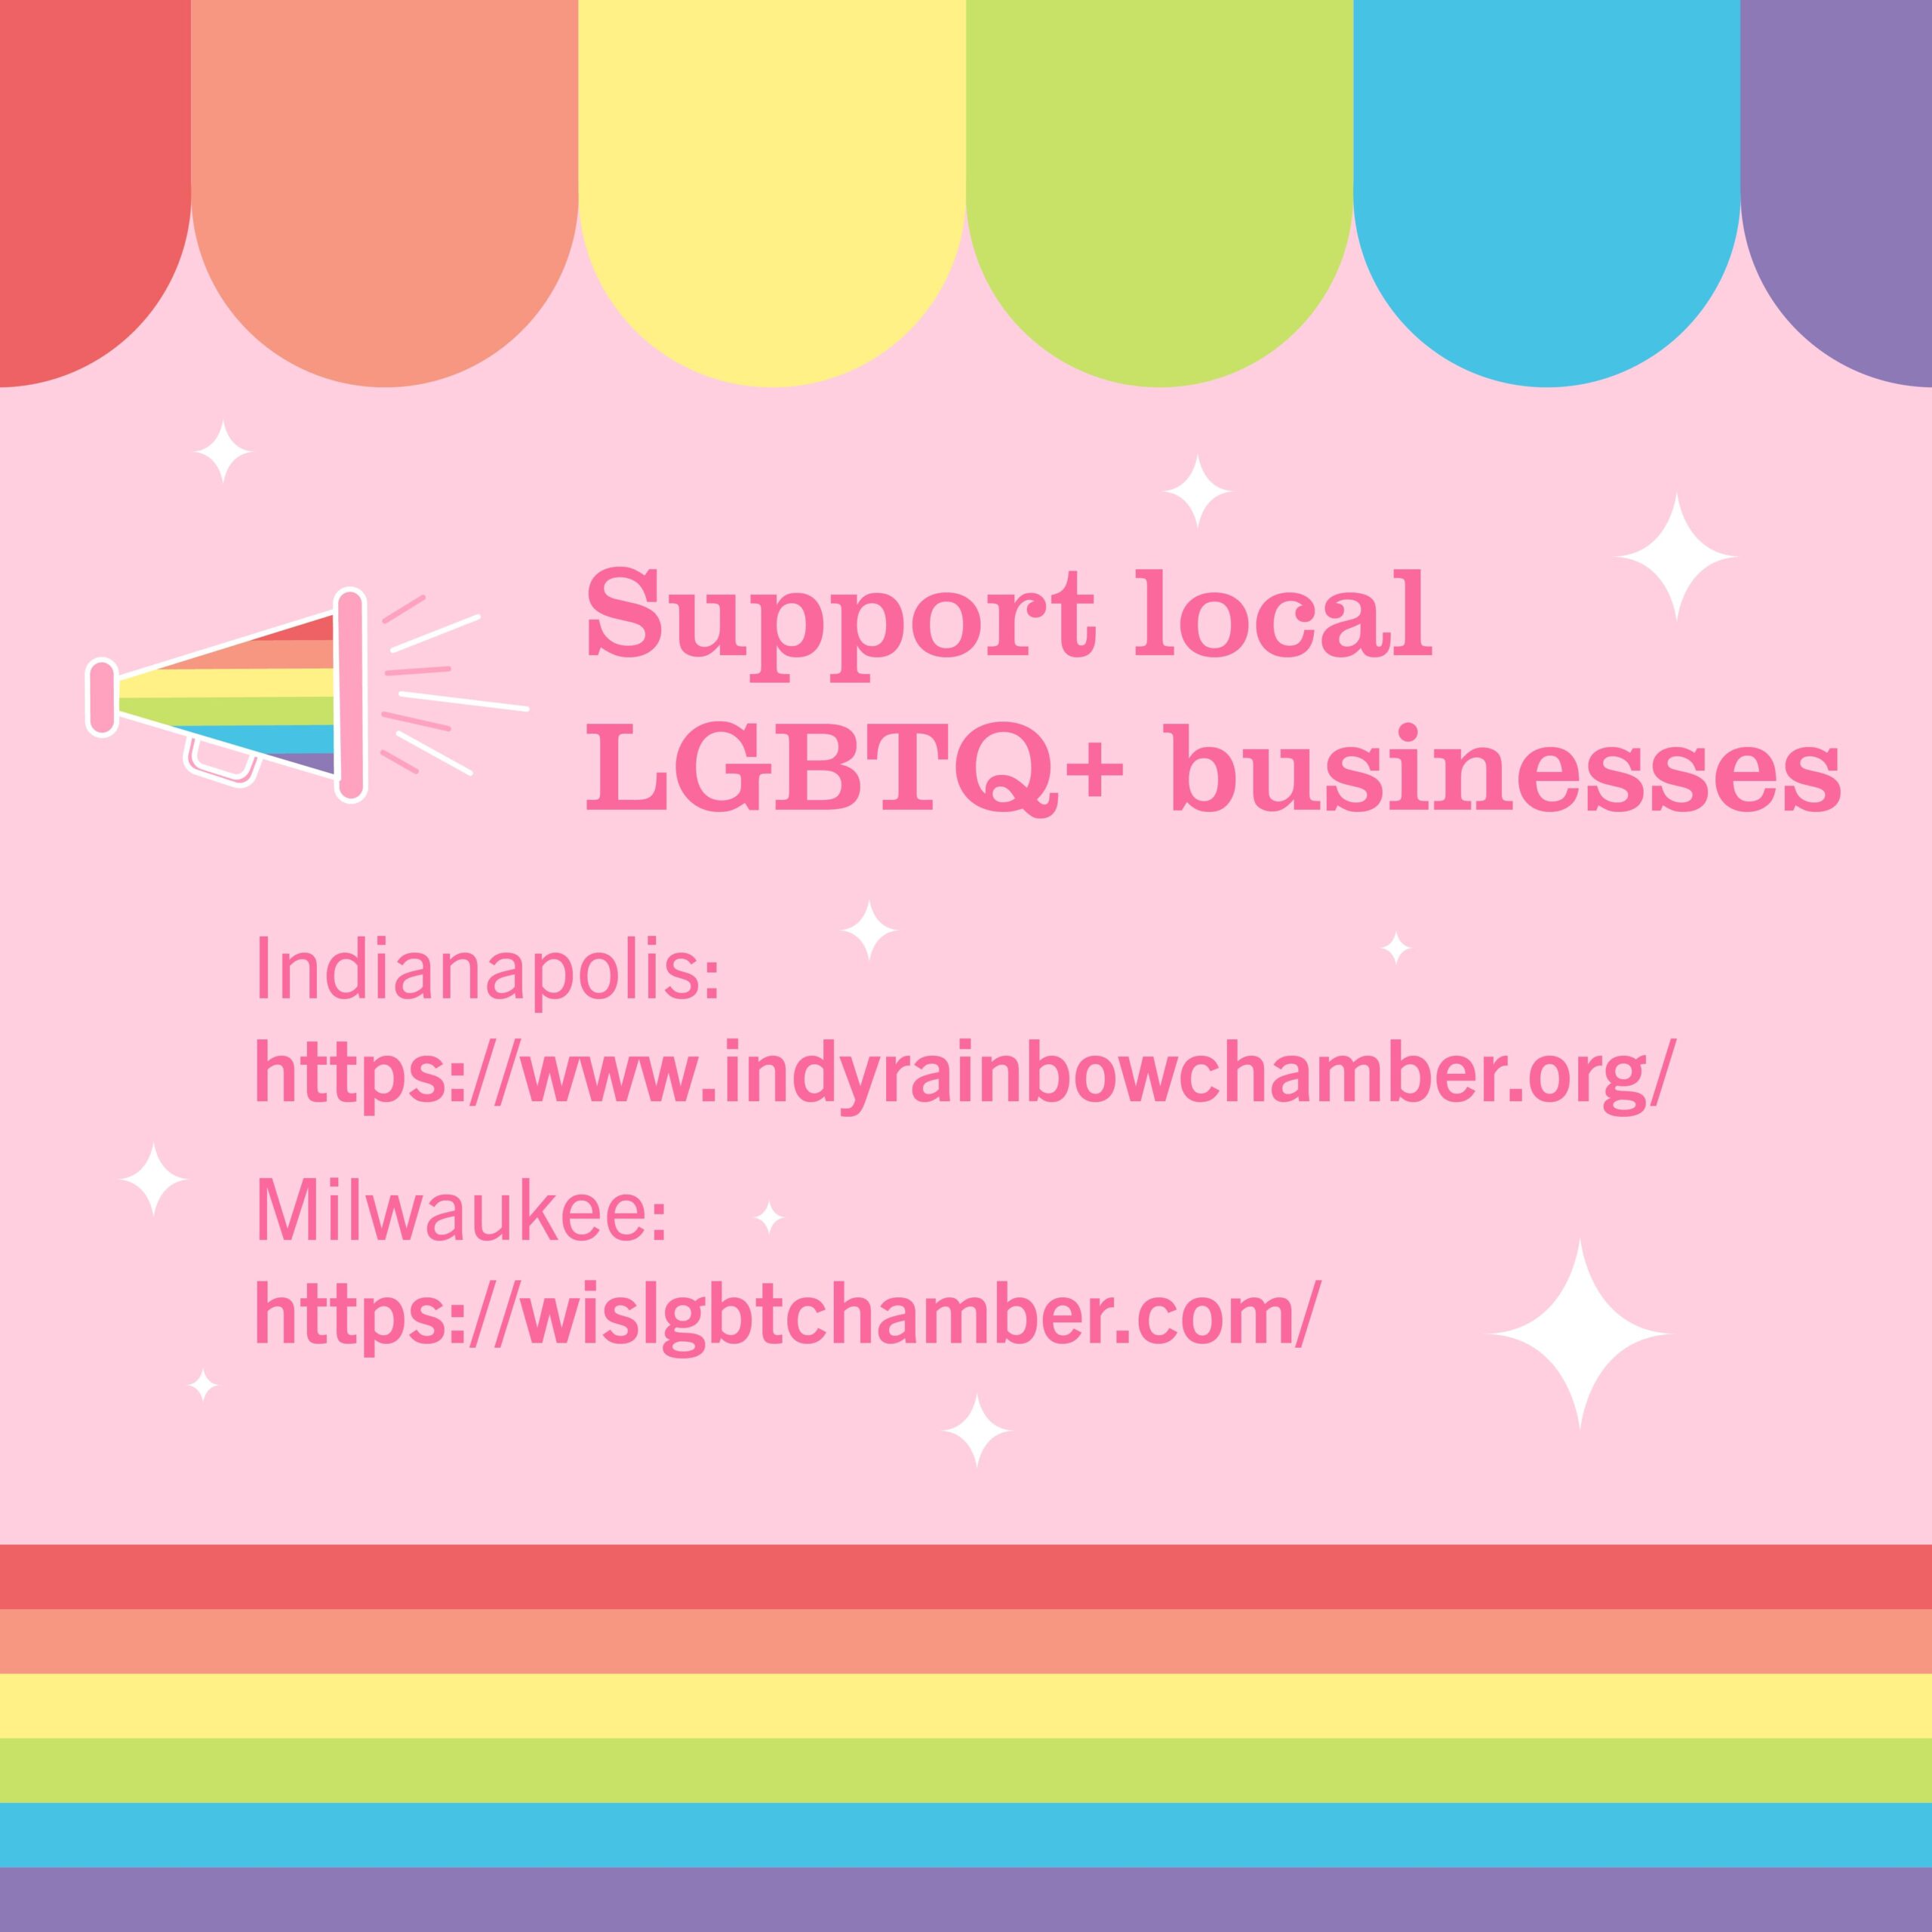 Support local LGBTQ+ businesses